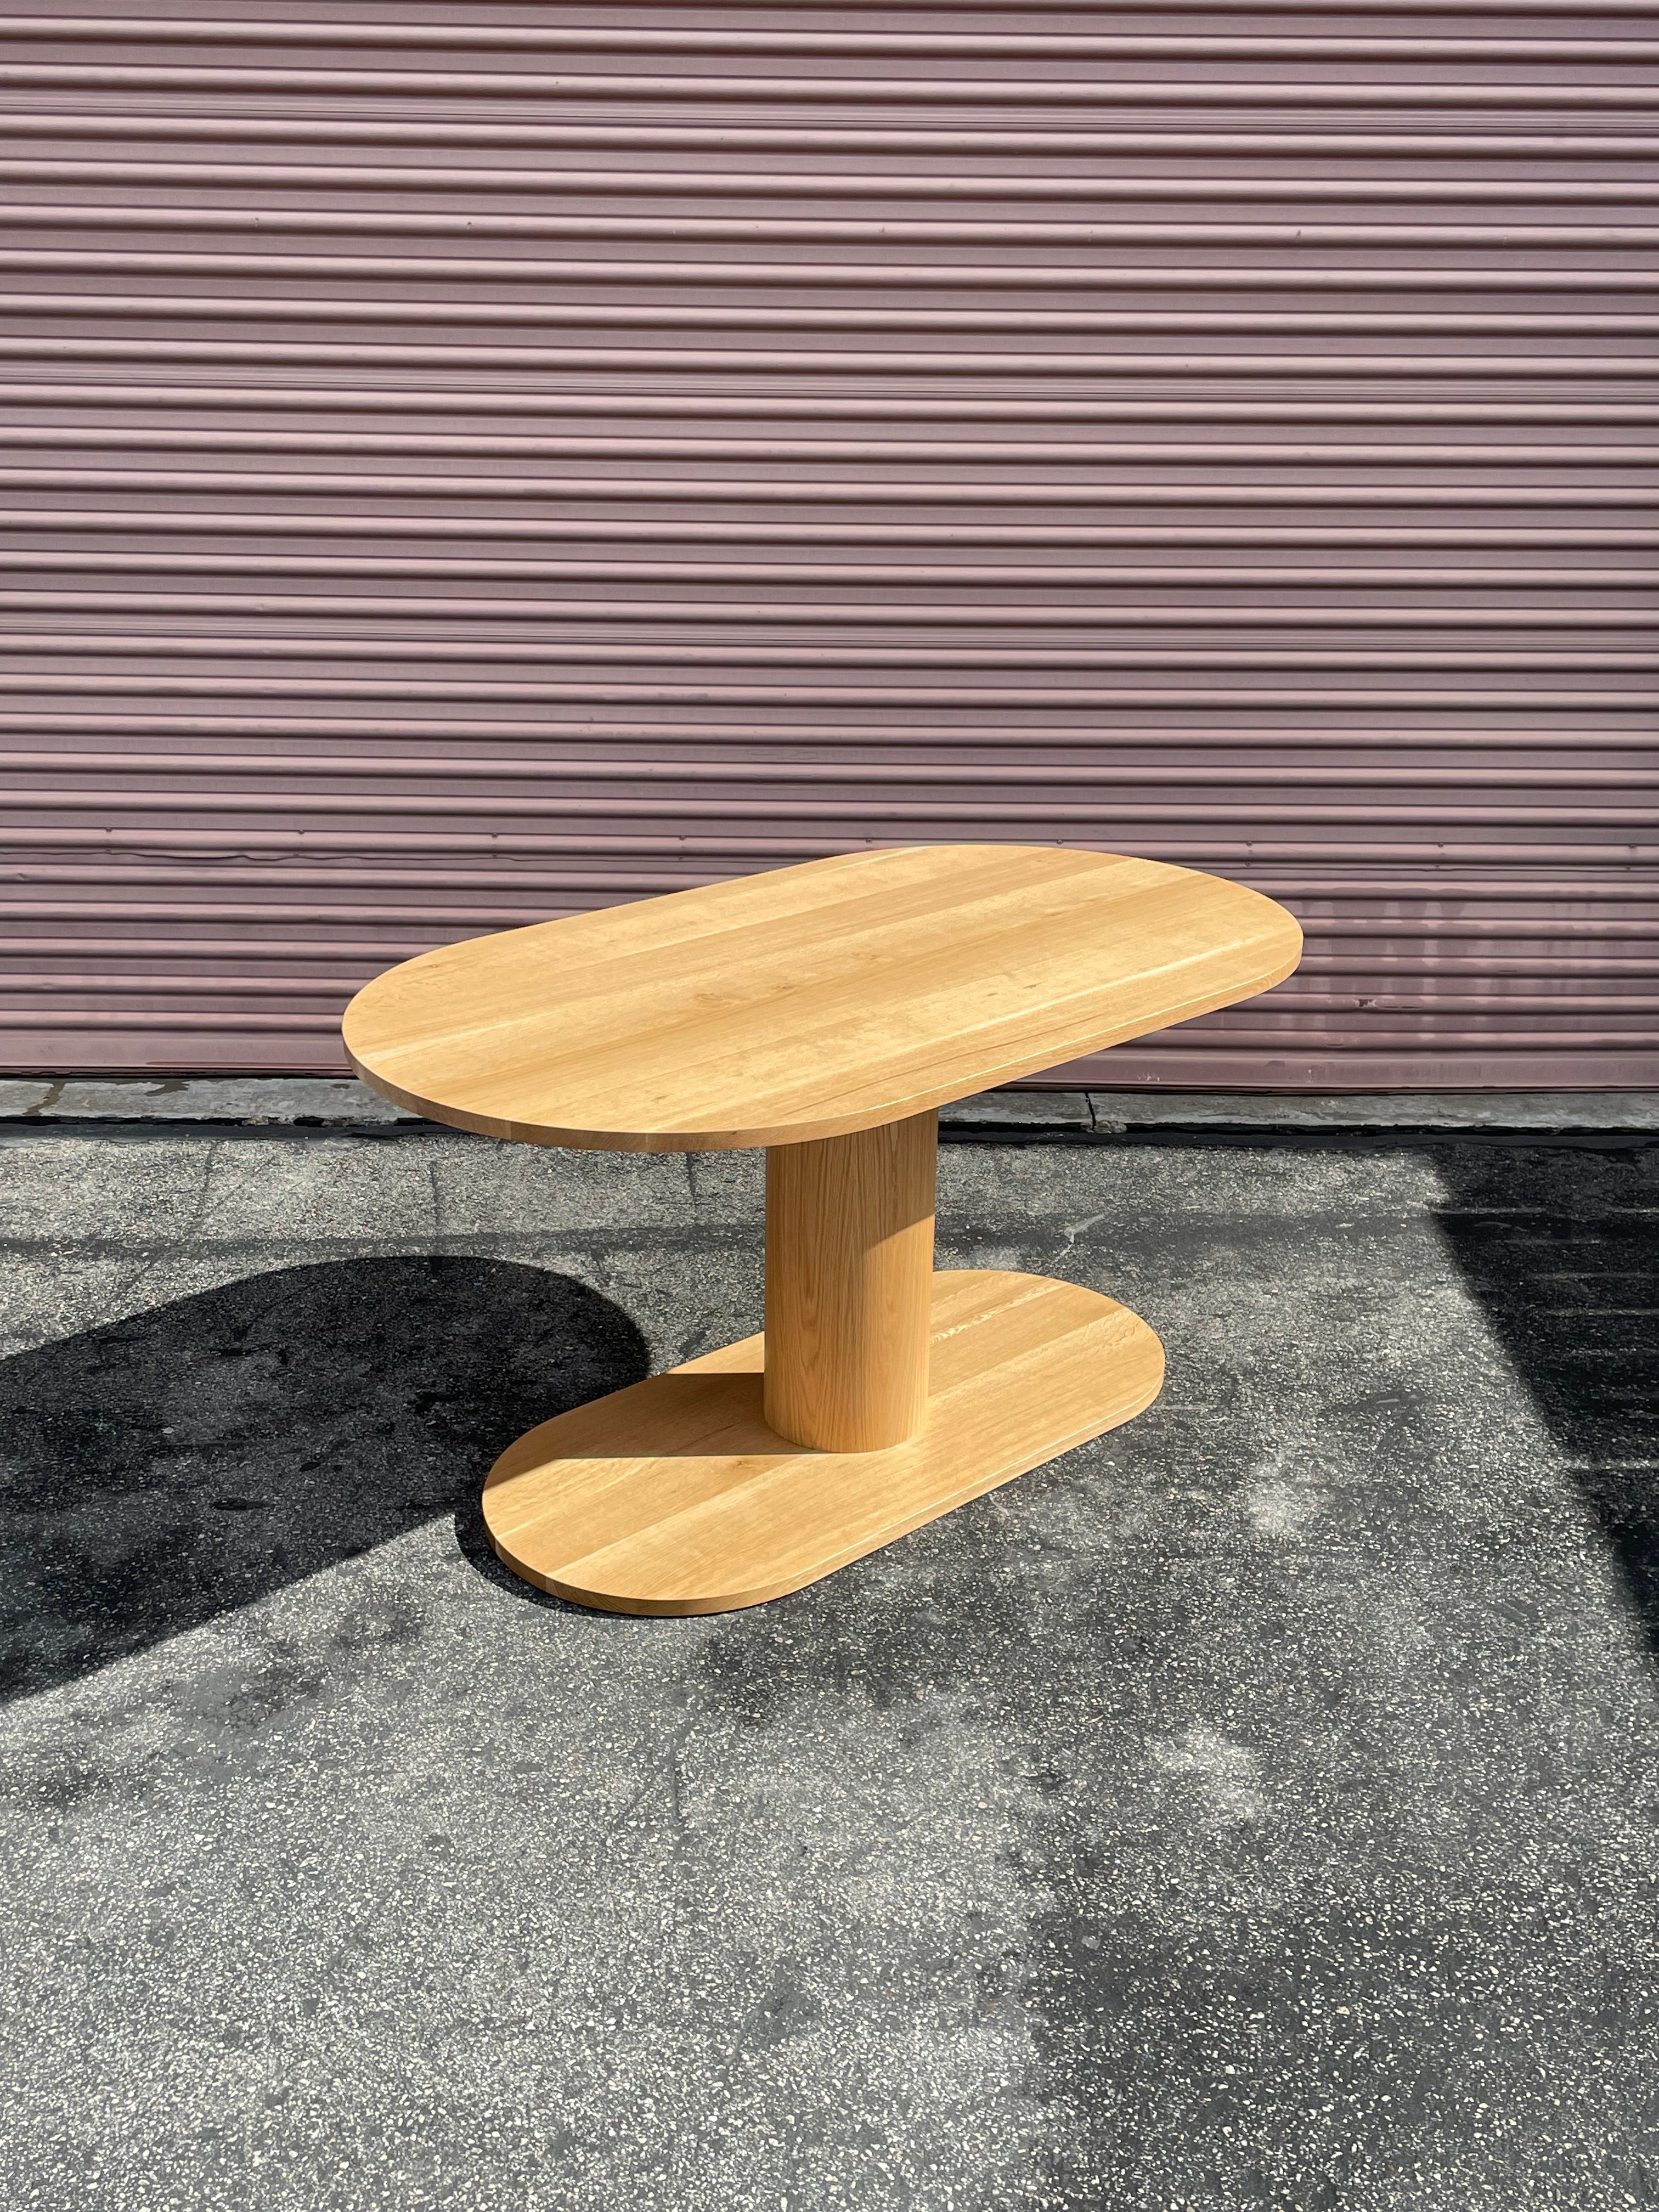  White Oak Dining Table - Frederick Tang Architecture product image 1